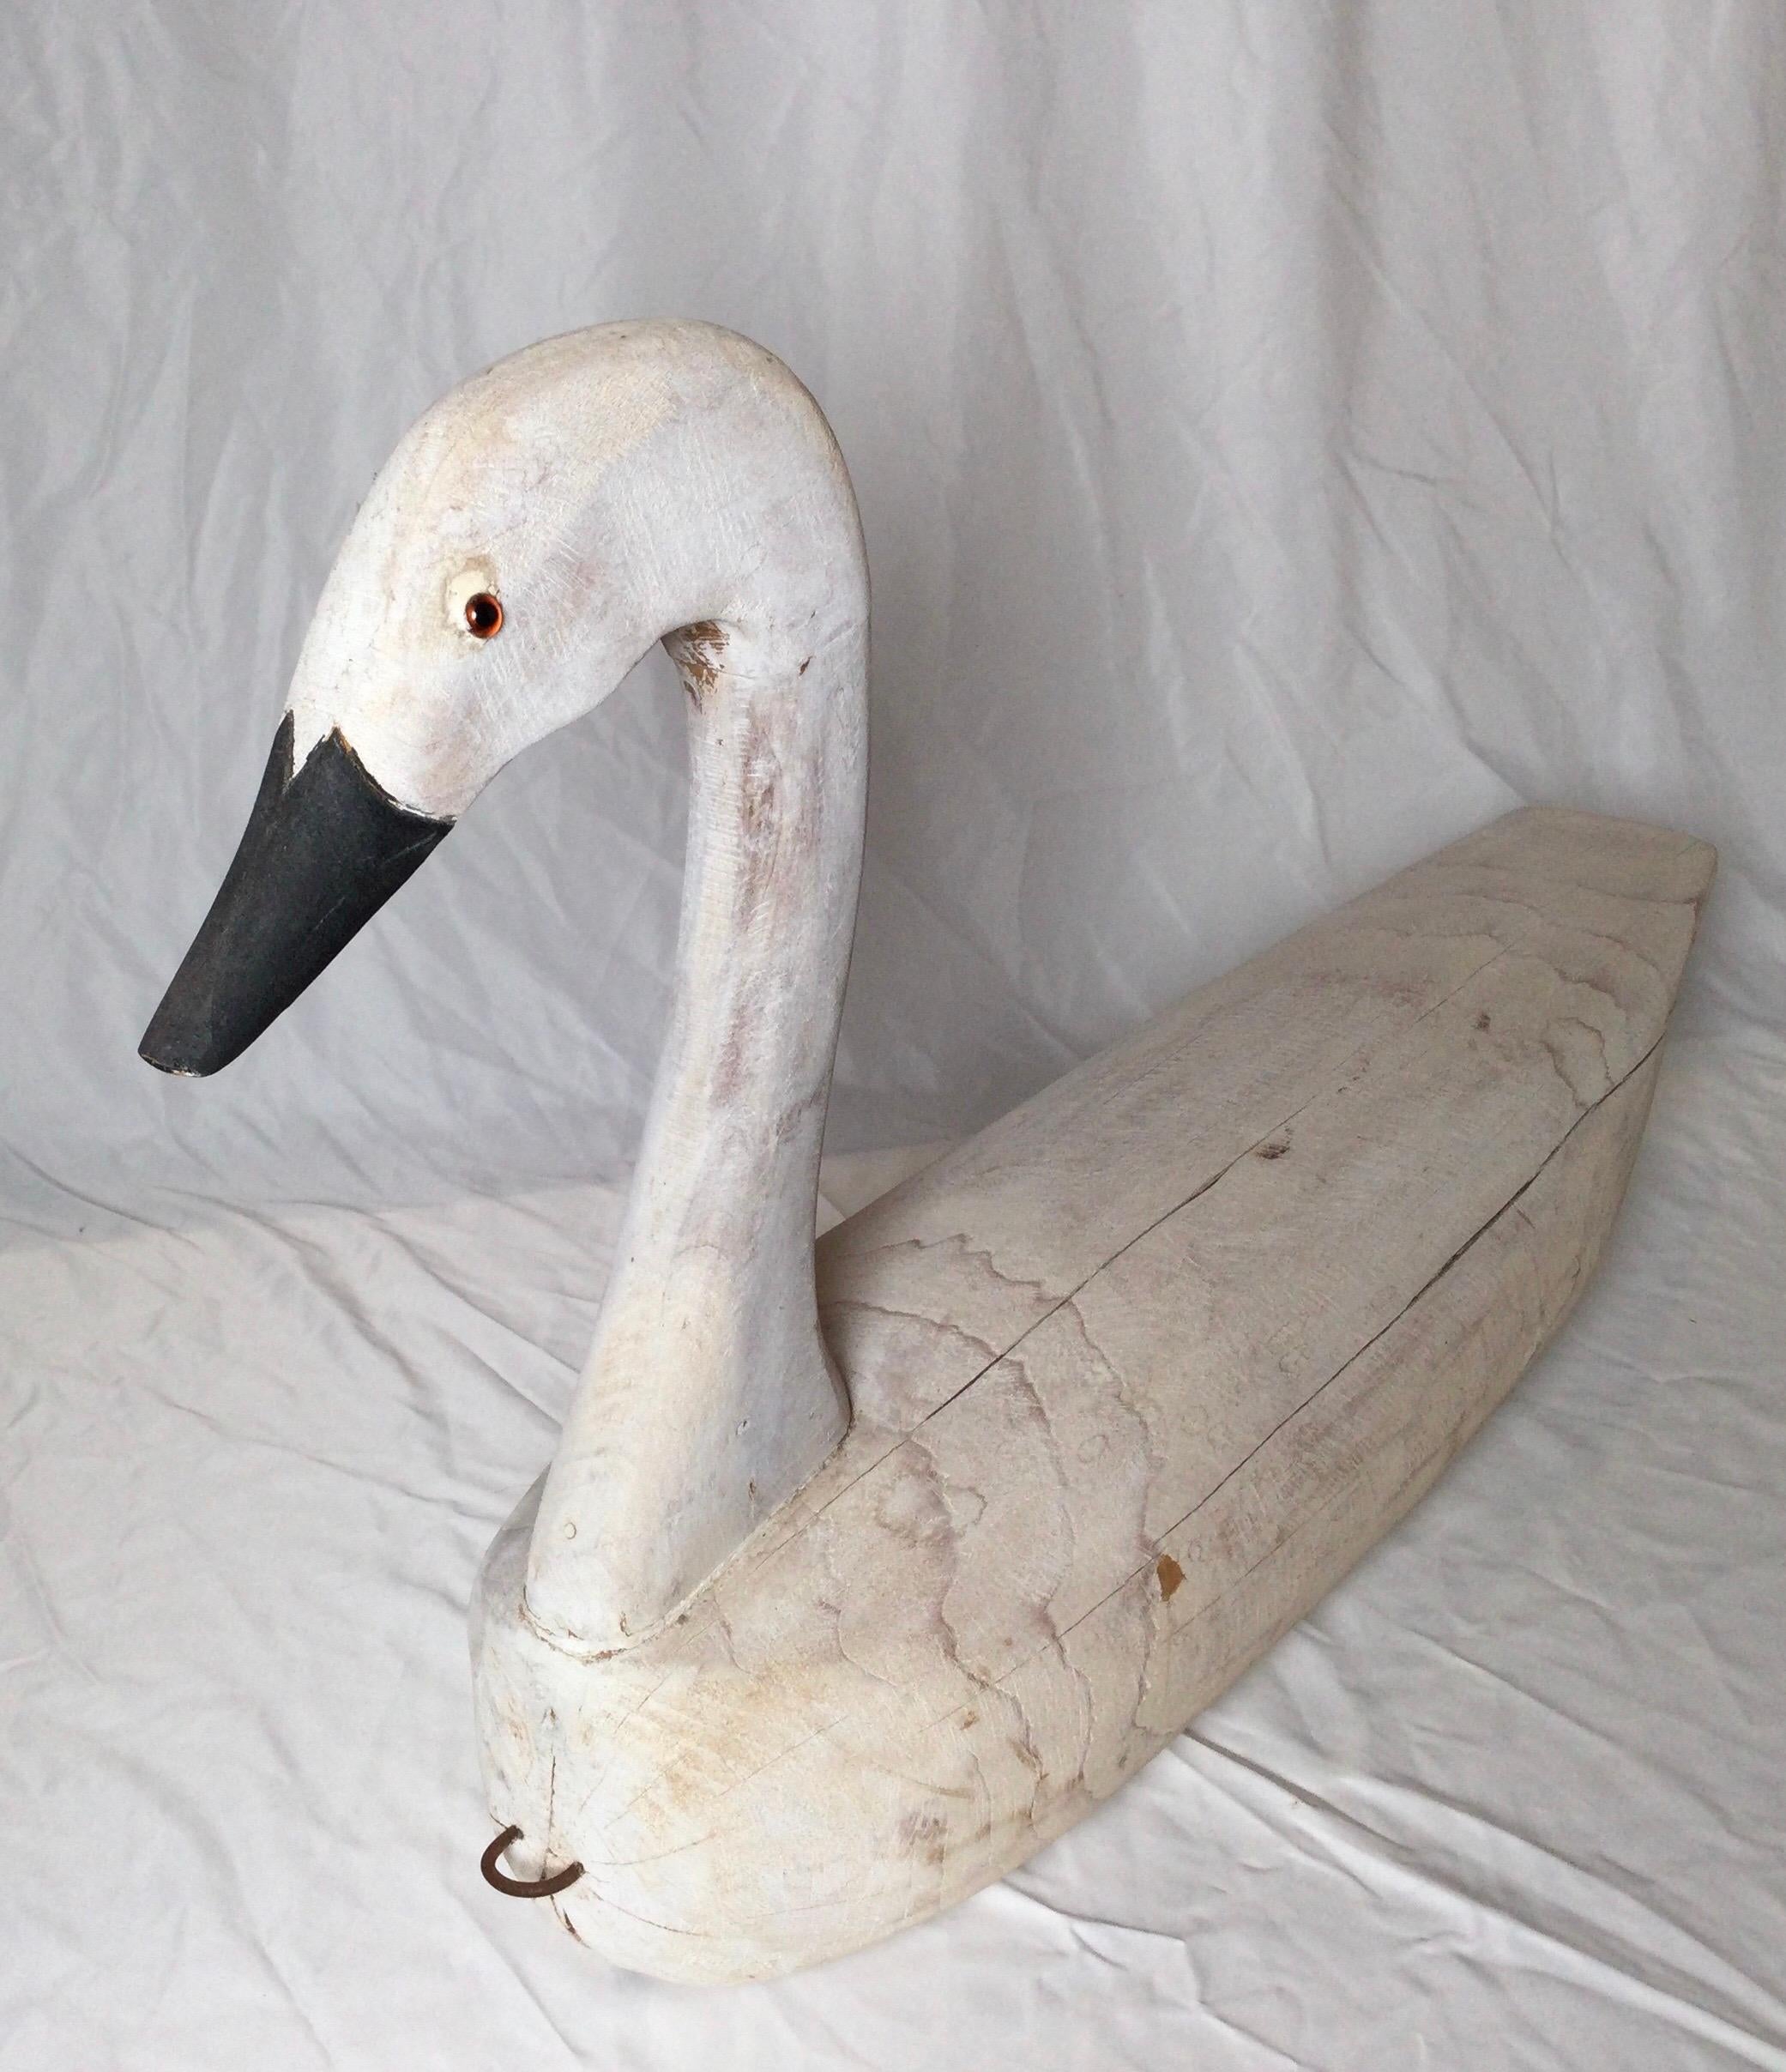 A hand carved and painted wooden swan decoy, artist signed on the base and dated 1988.